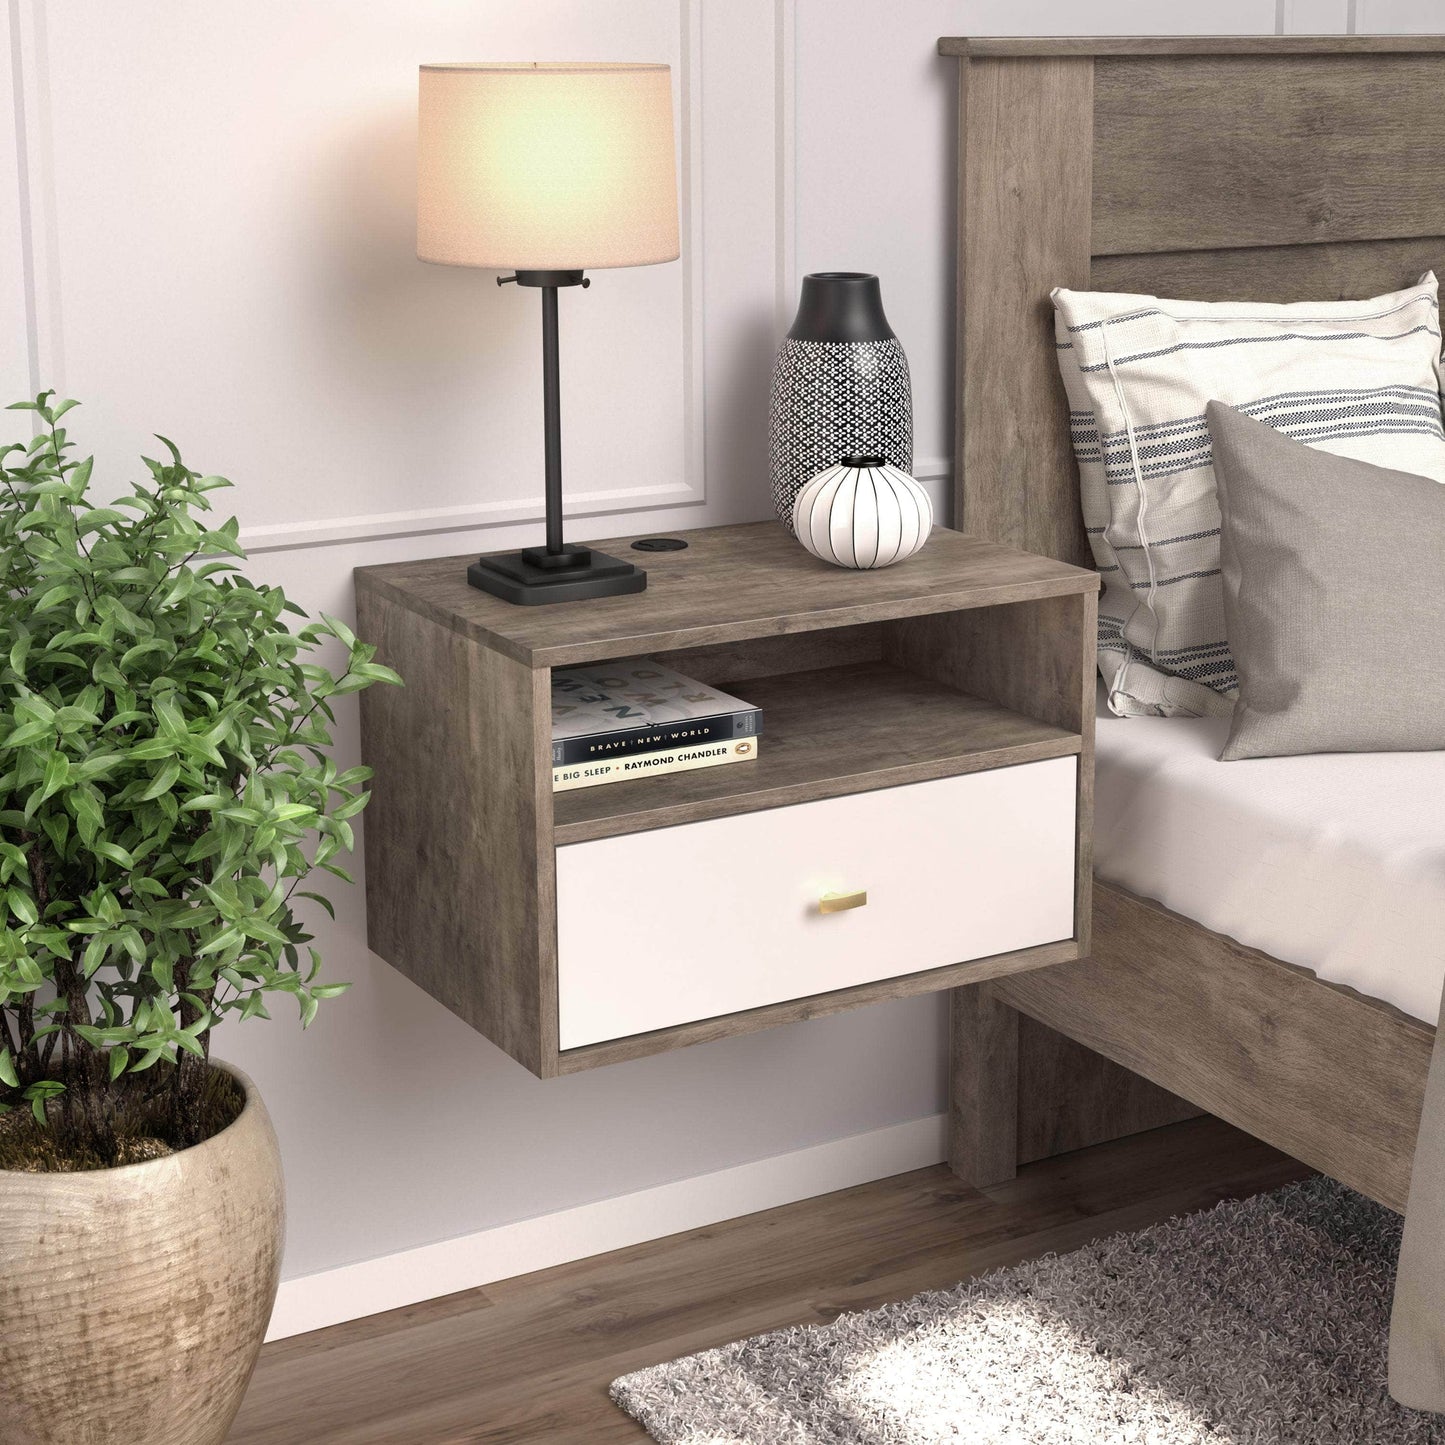 Pending - Modubox Nightstands Floating Nightstand With Open Shelf - Available in 4 Colours